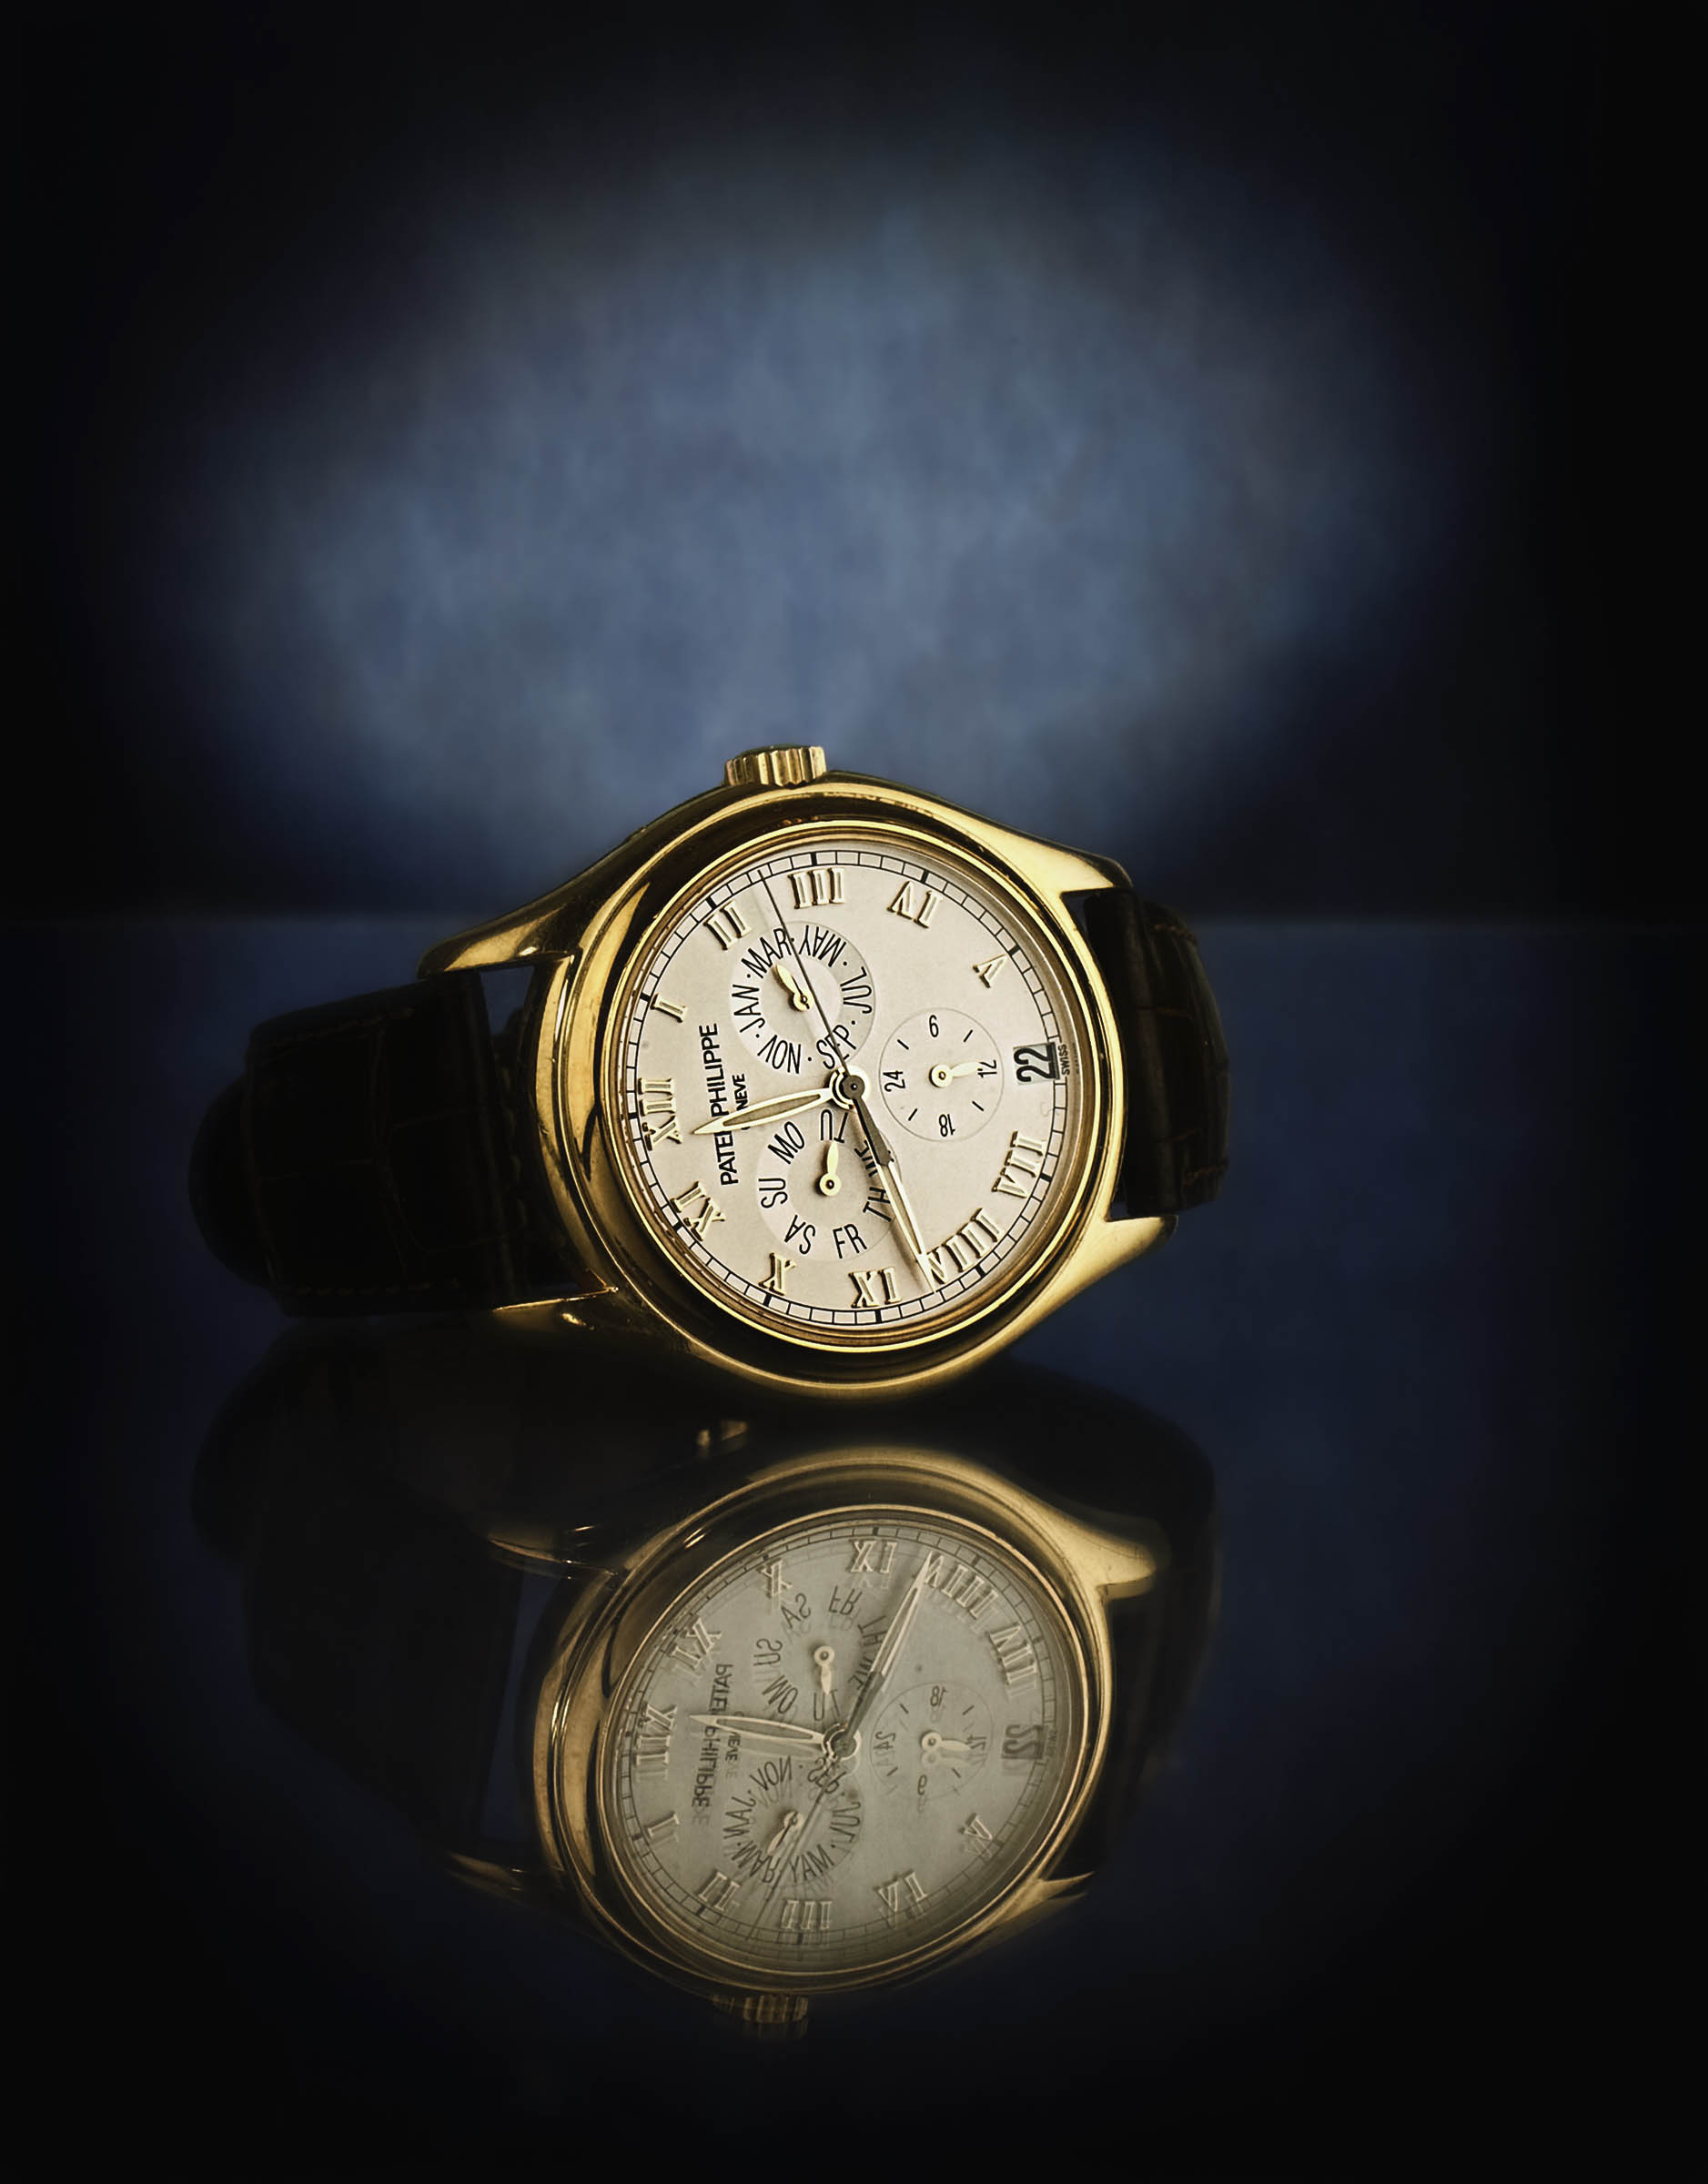 Patek Philippe Mens Gold Watch Bellagio Bought Photo by Wick Beavers Professional Photographer NYC